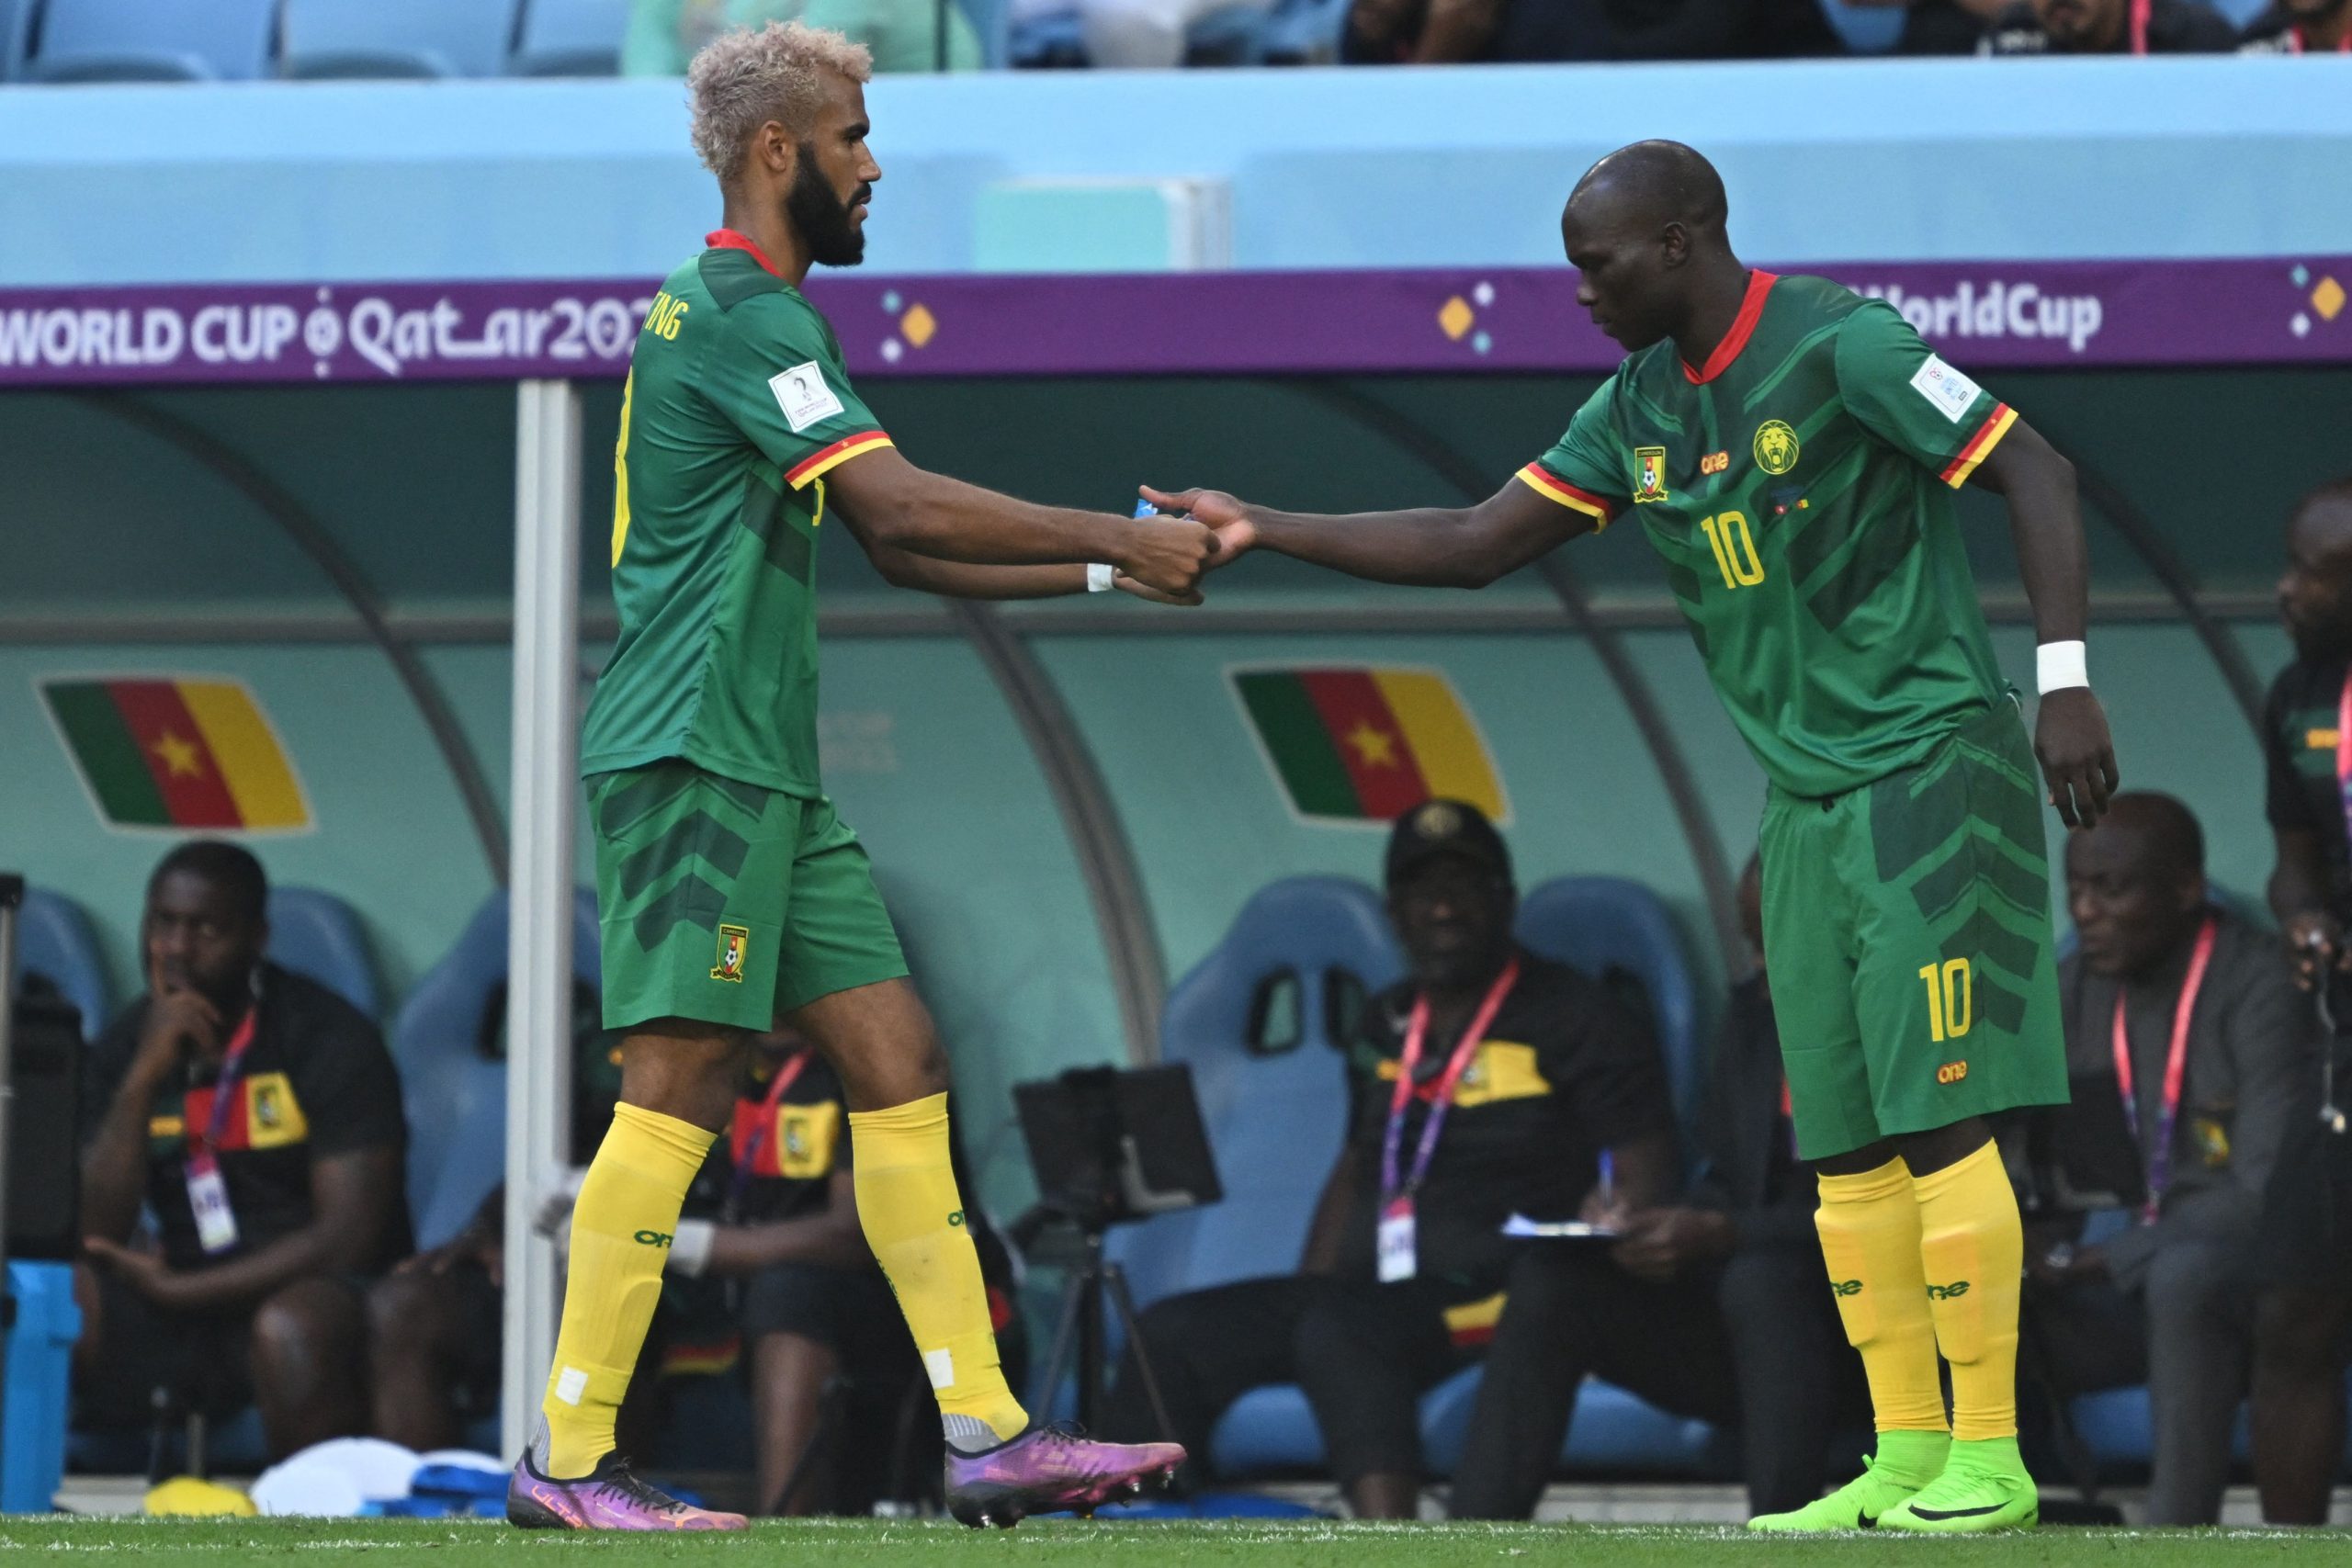 Cameroon's forward Eric Maxim Choupo-Moting hands the captain's armband to Cameroon's forward #10 Vincent Aboubakar after being substituted during the Qatar 2022 World Cup Group G football match between Switzerland and Cameroon at the Al-Janoub Stadium in Al-Wakrah, south of Doha on November 24, 2022.